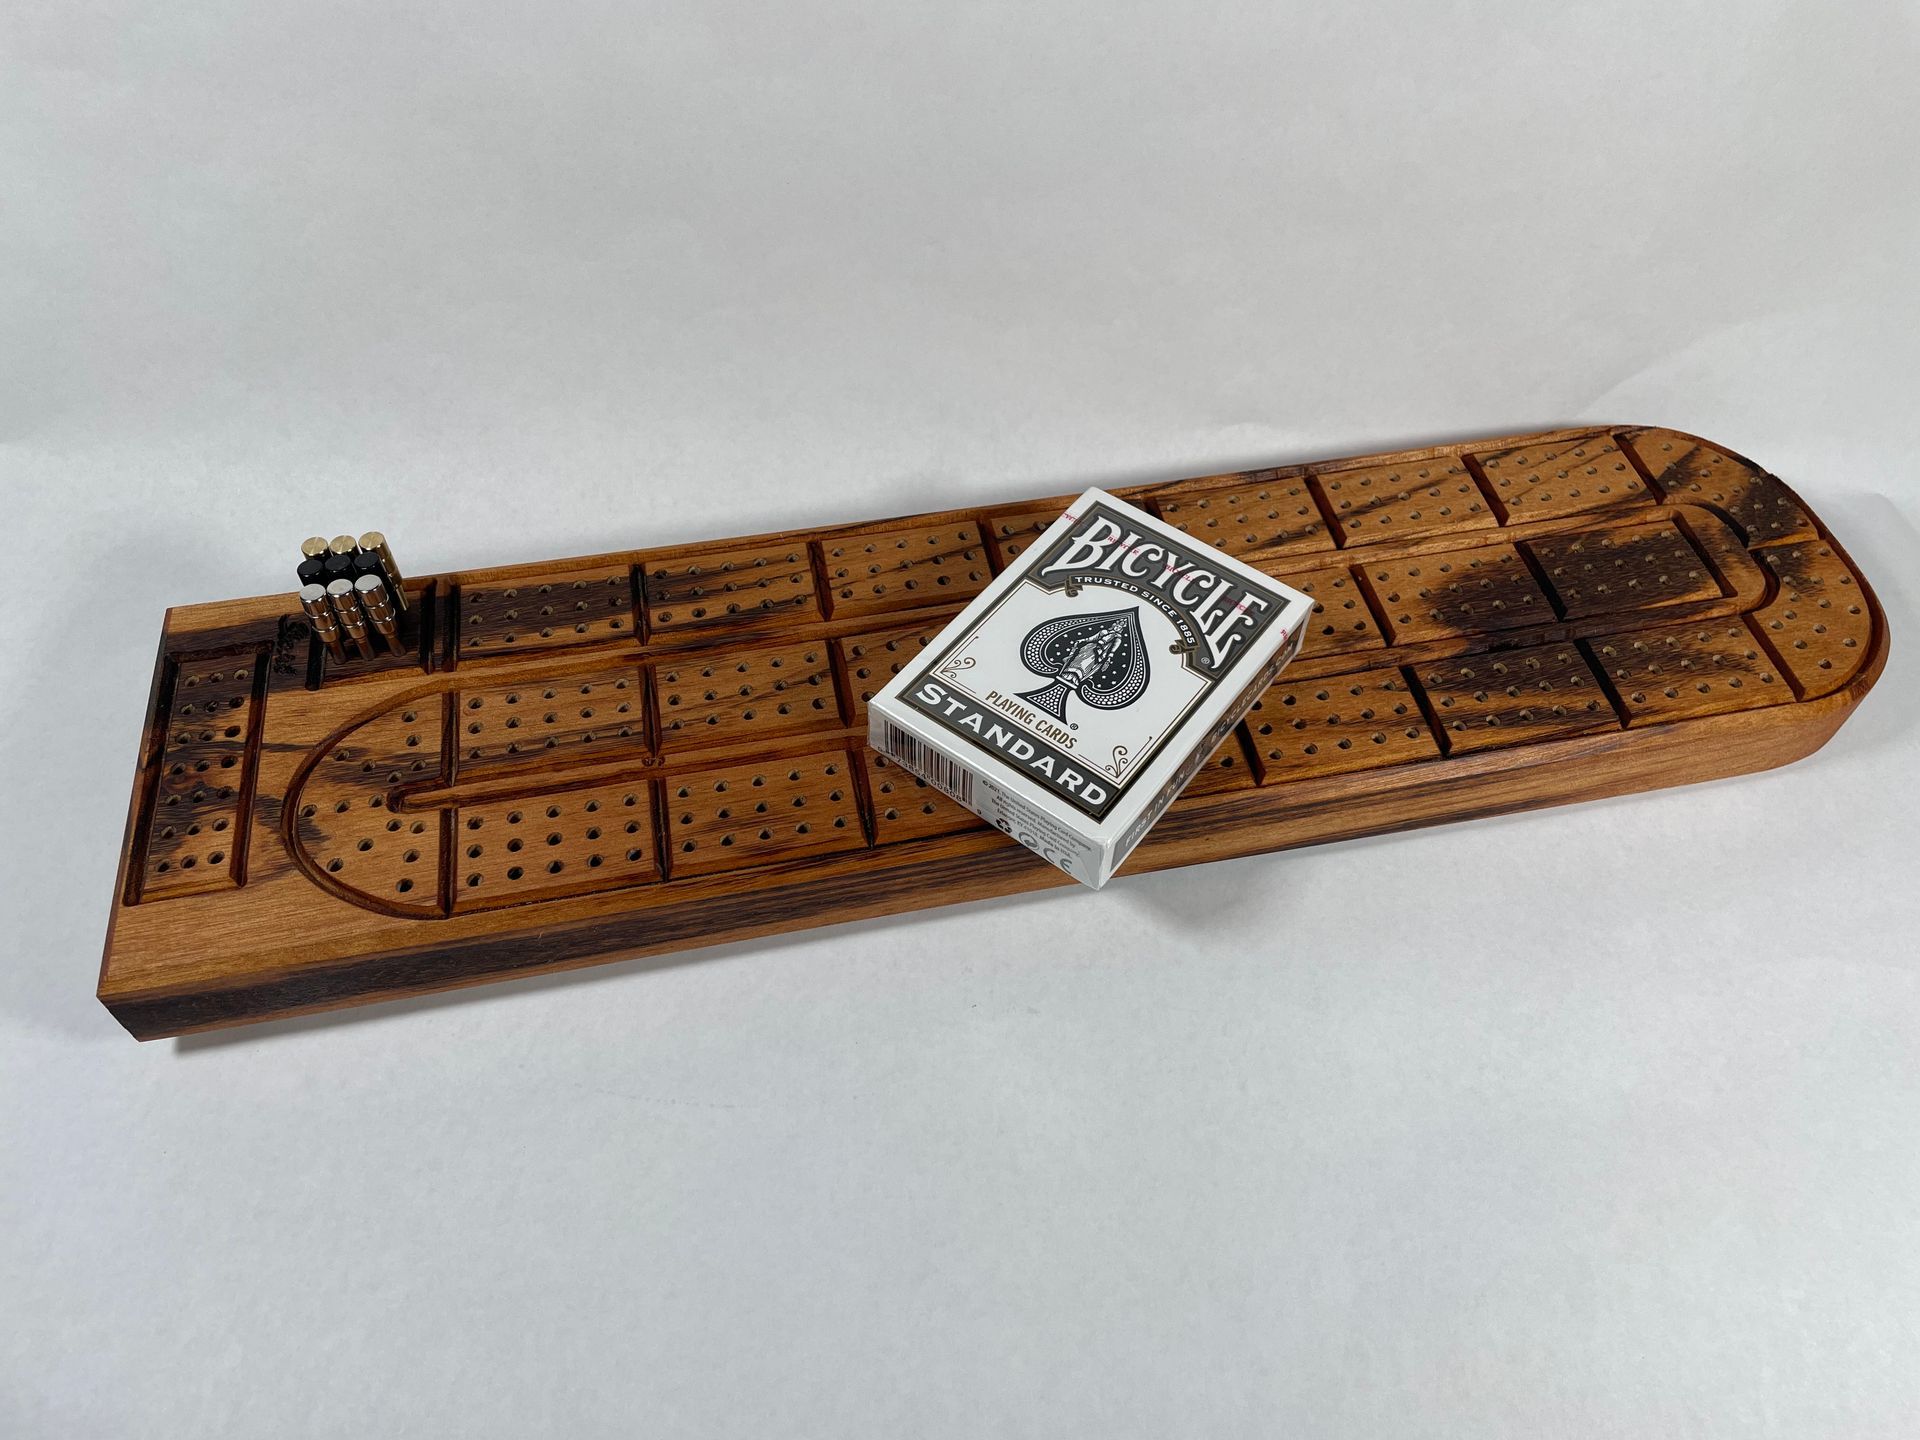 A bicycle playing card is sitting on top of a wooden cribbage board.